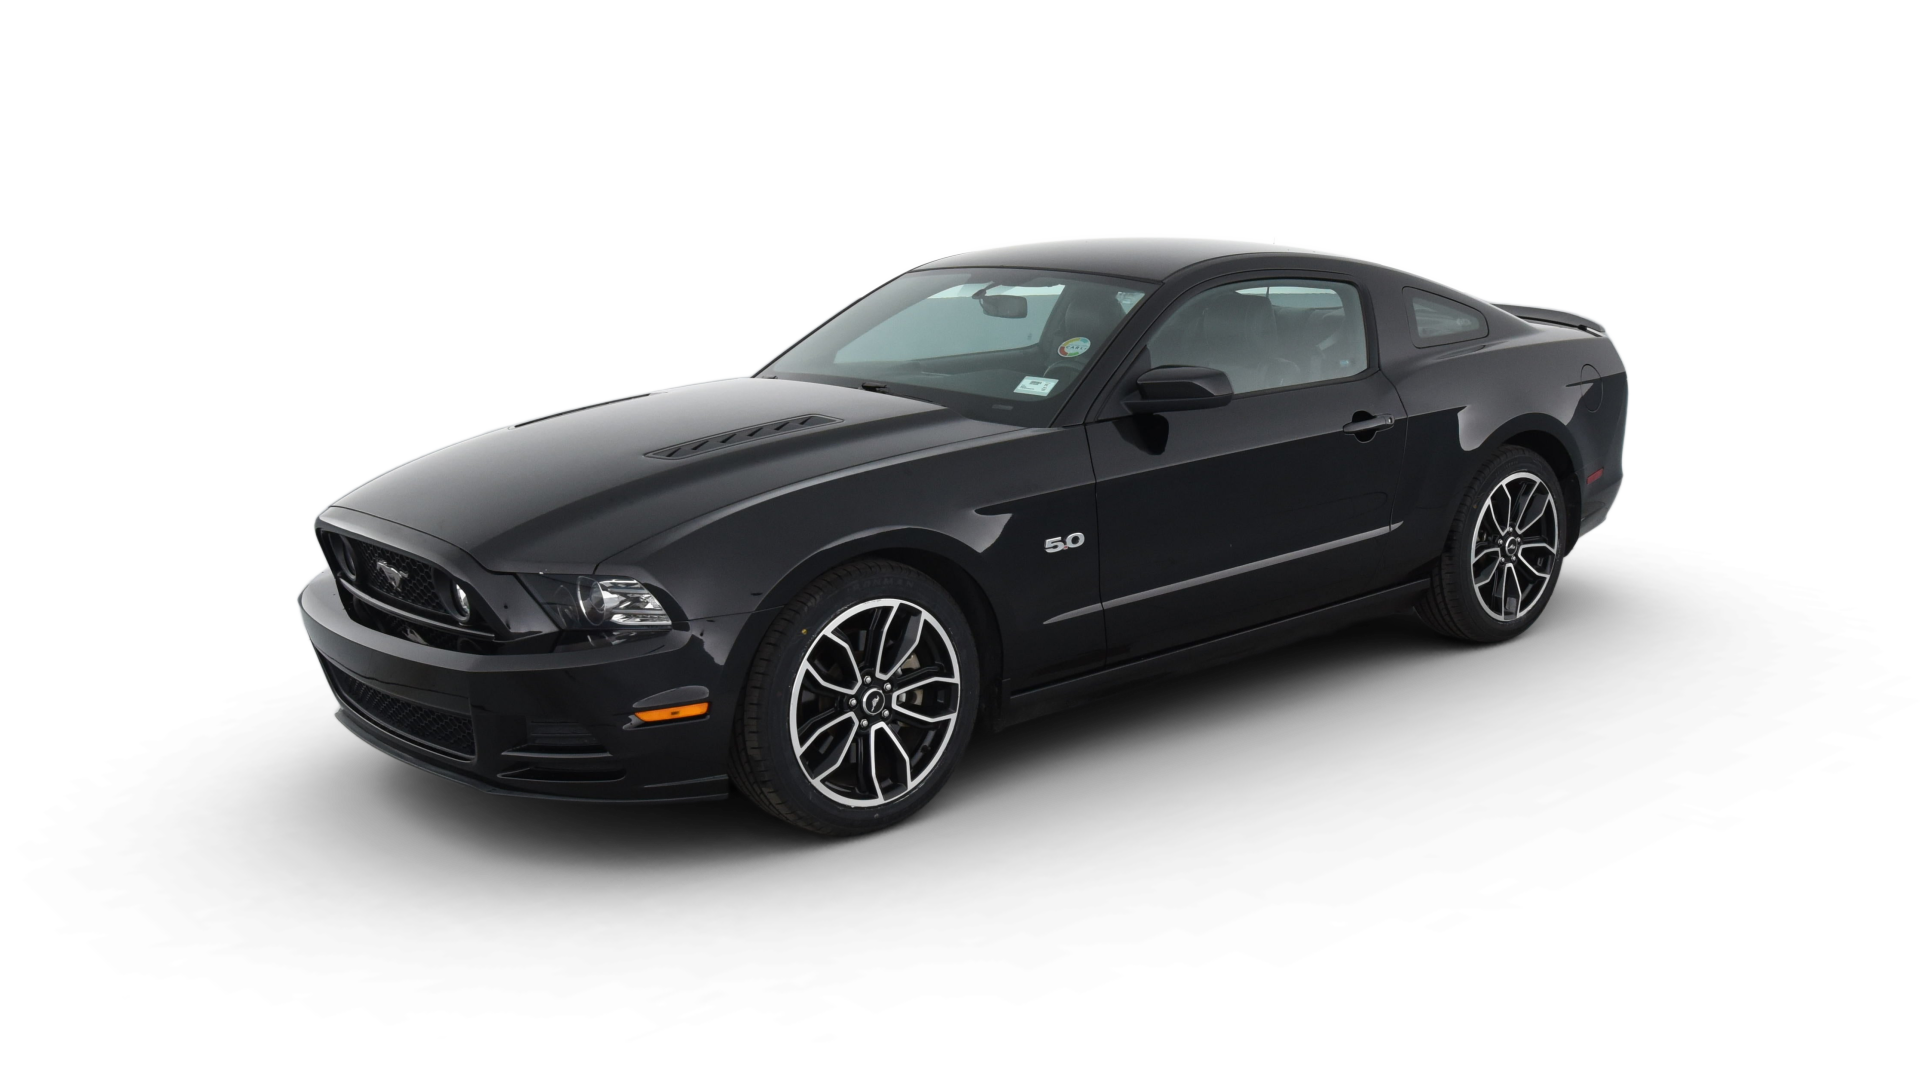 Used 2013 Ford Mustang For Sale Online | Carvana